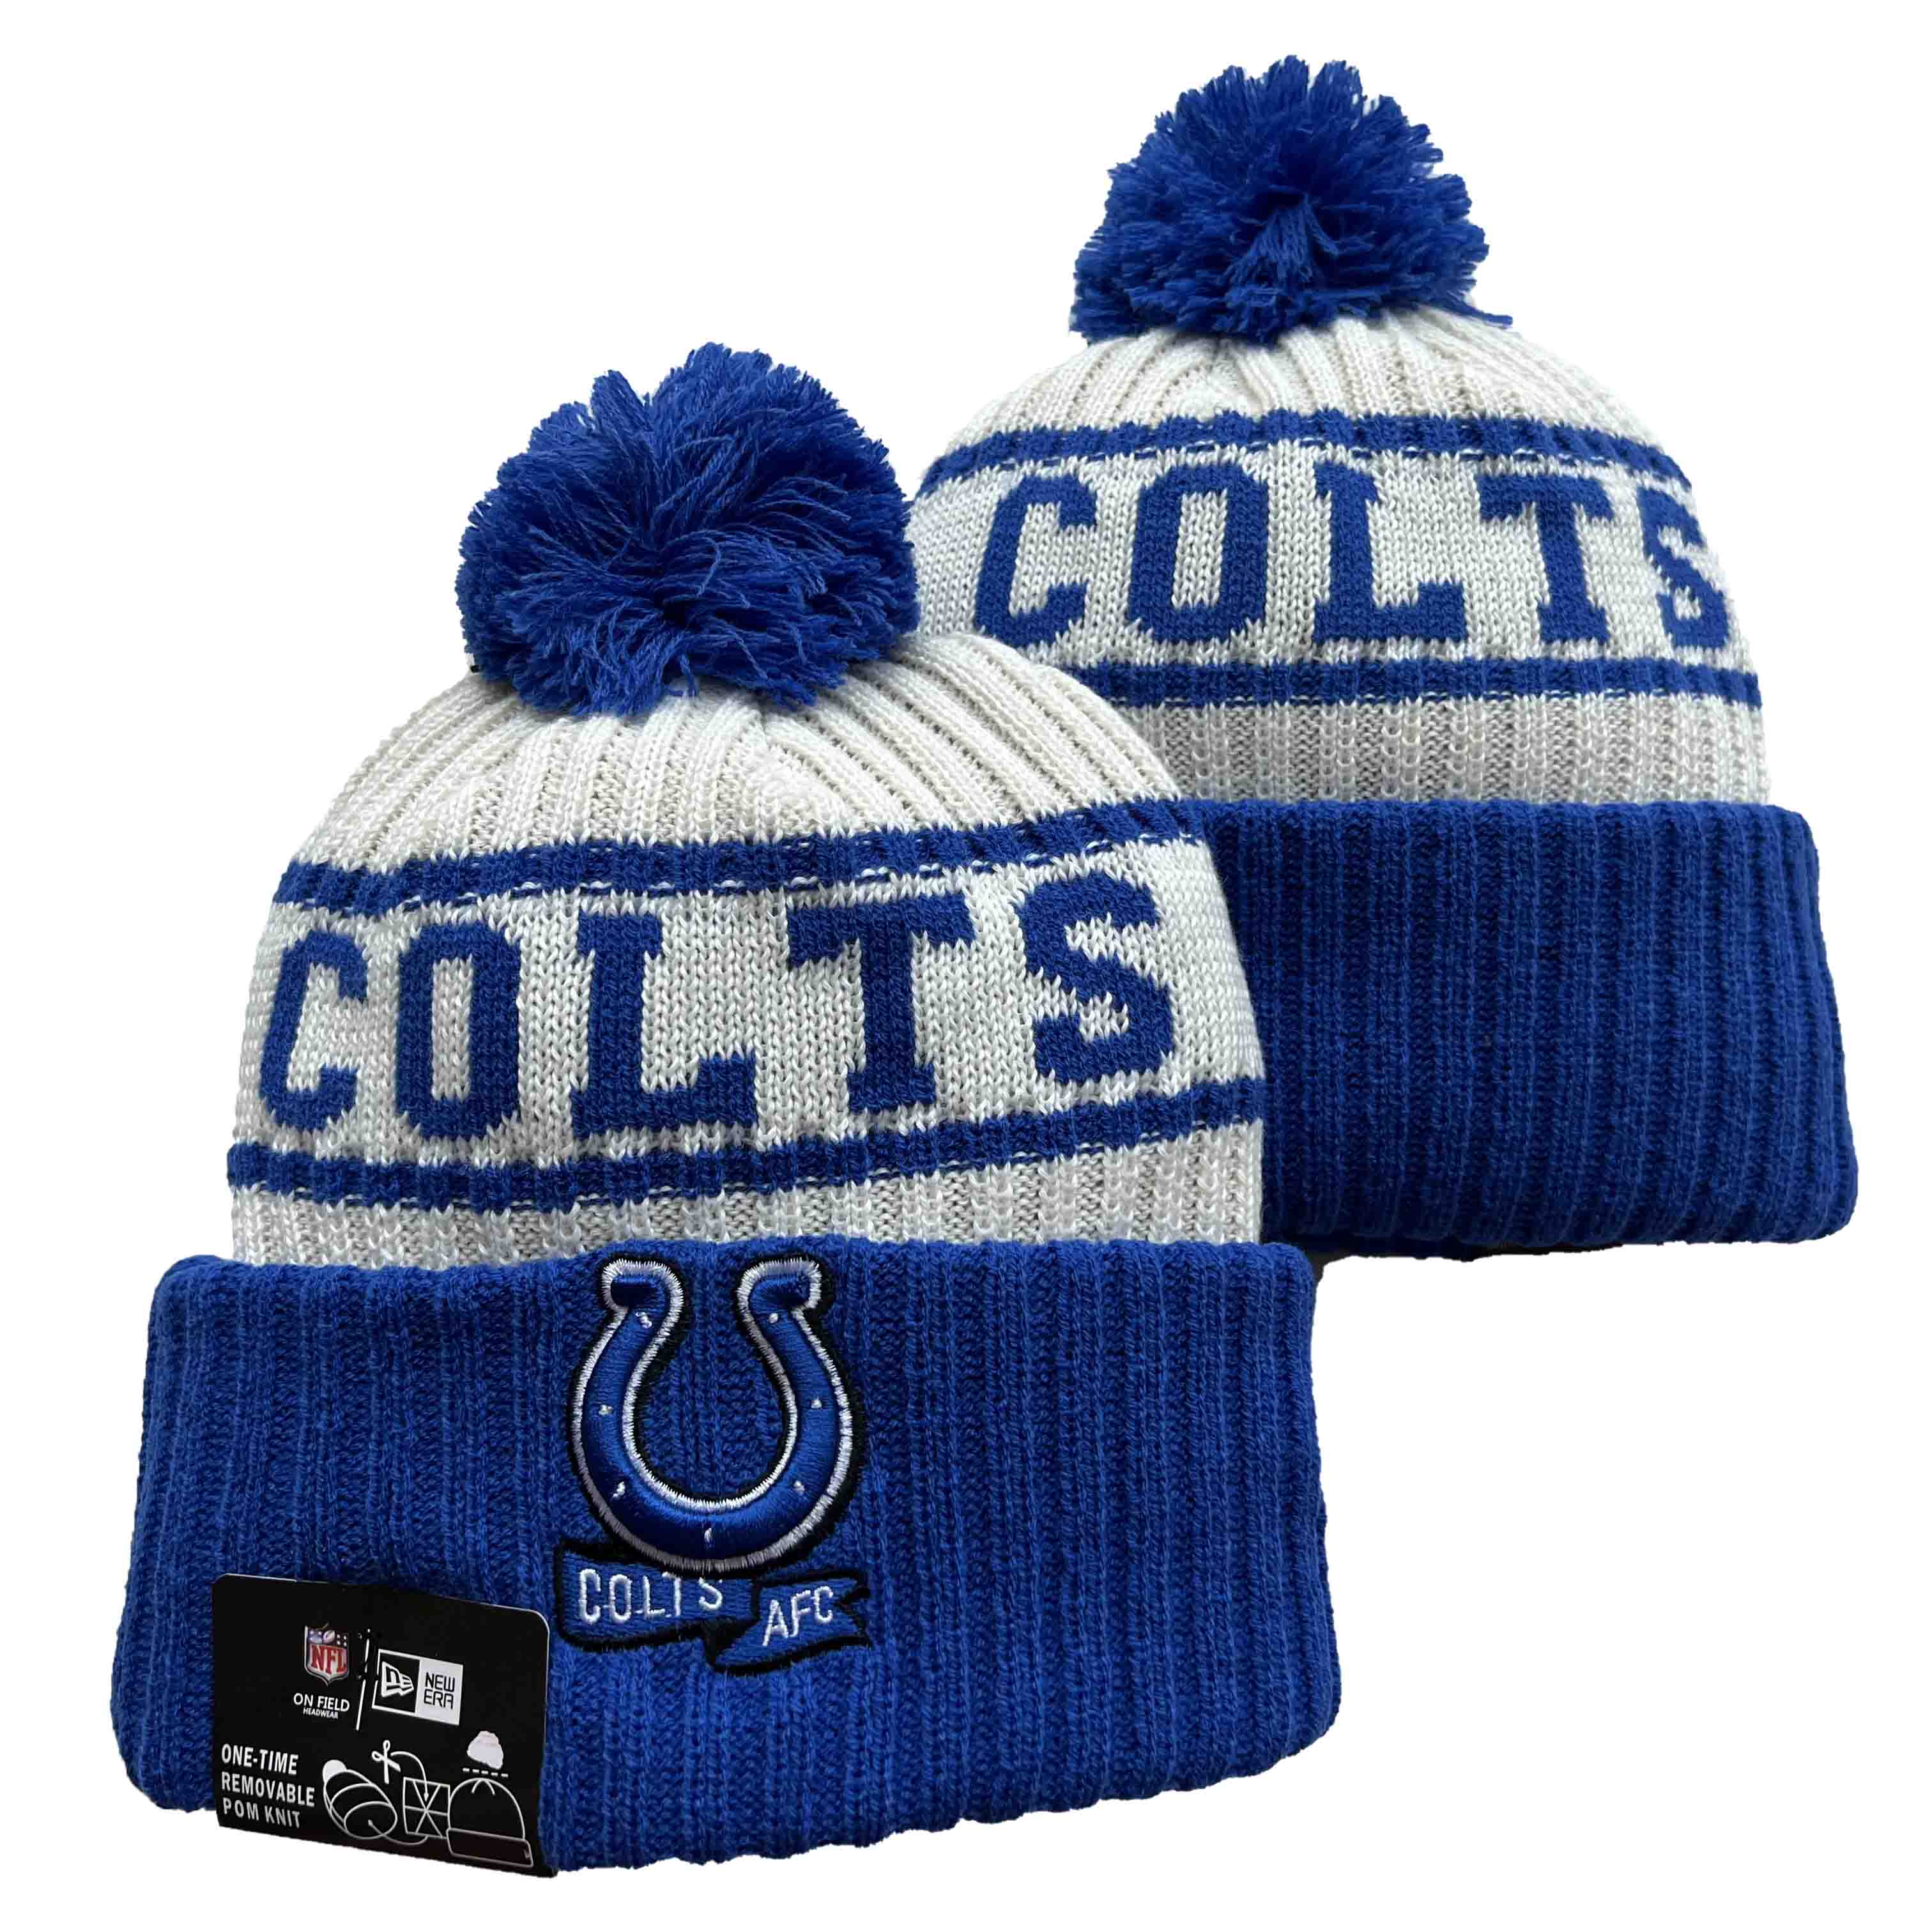 NFL Indianapolis Colts Beanies Knit Hats-YD1002